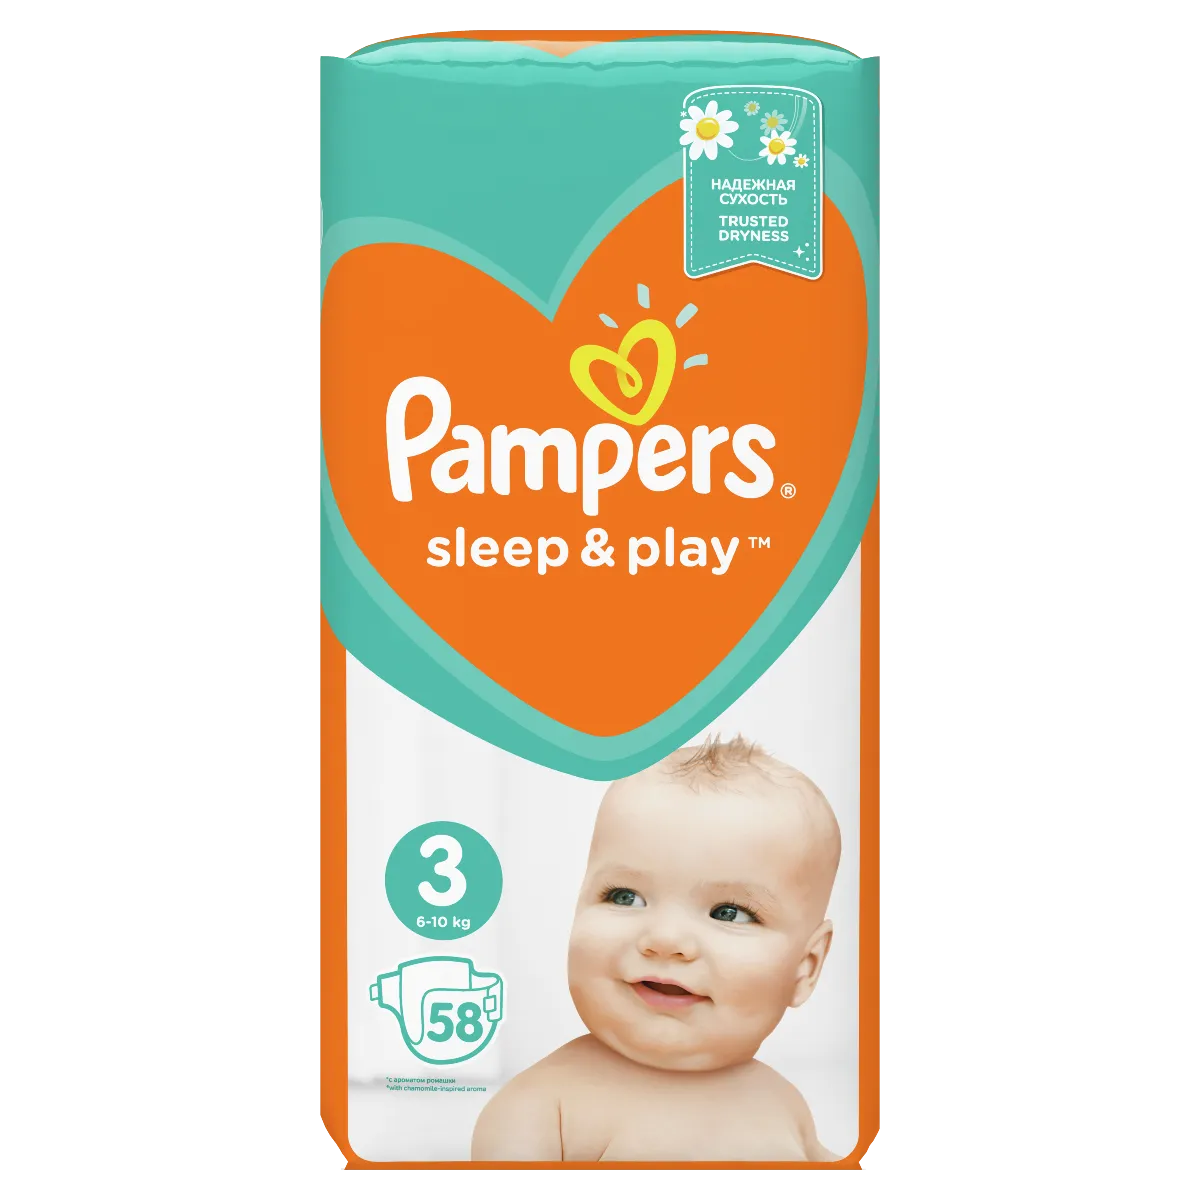 pampers active baby dry 3 150